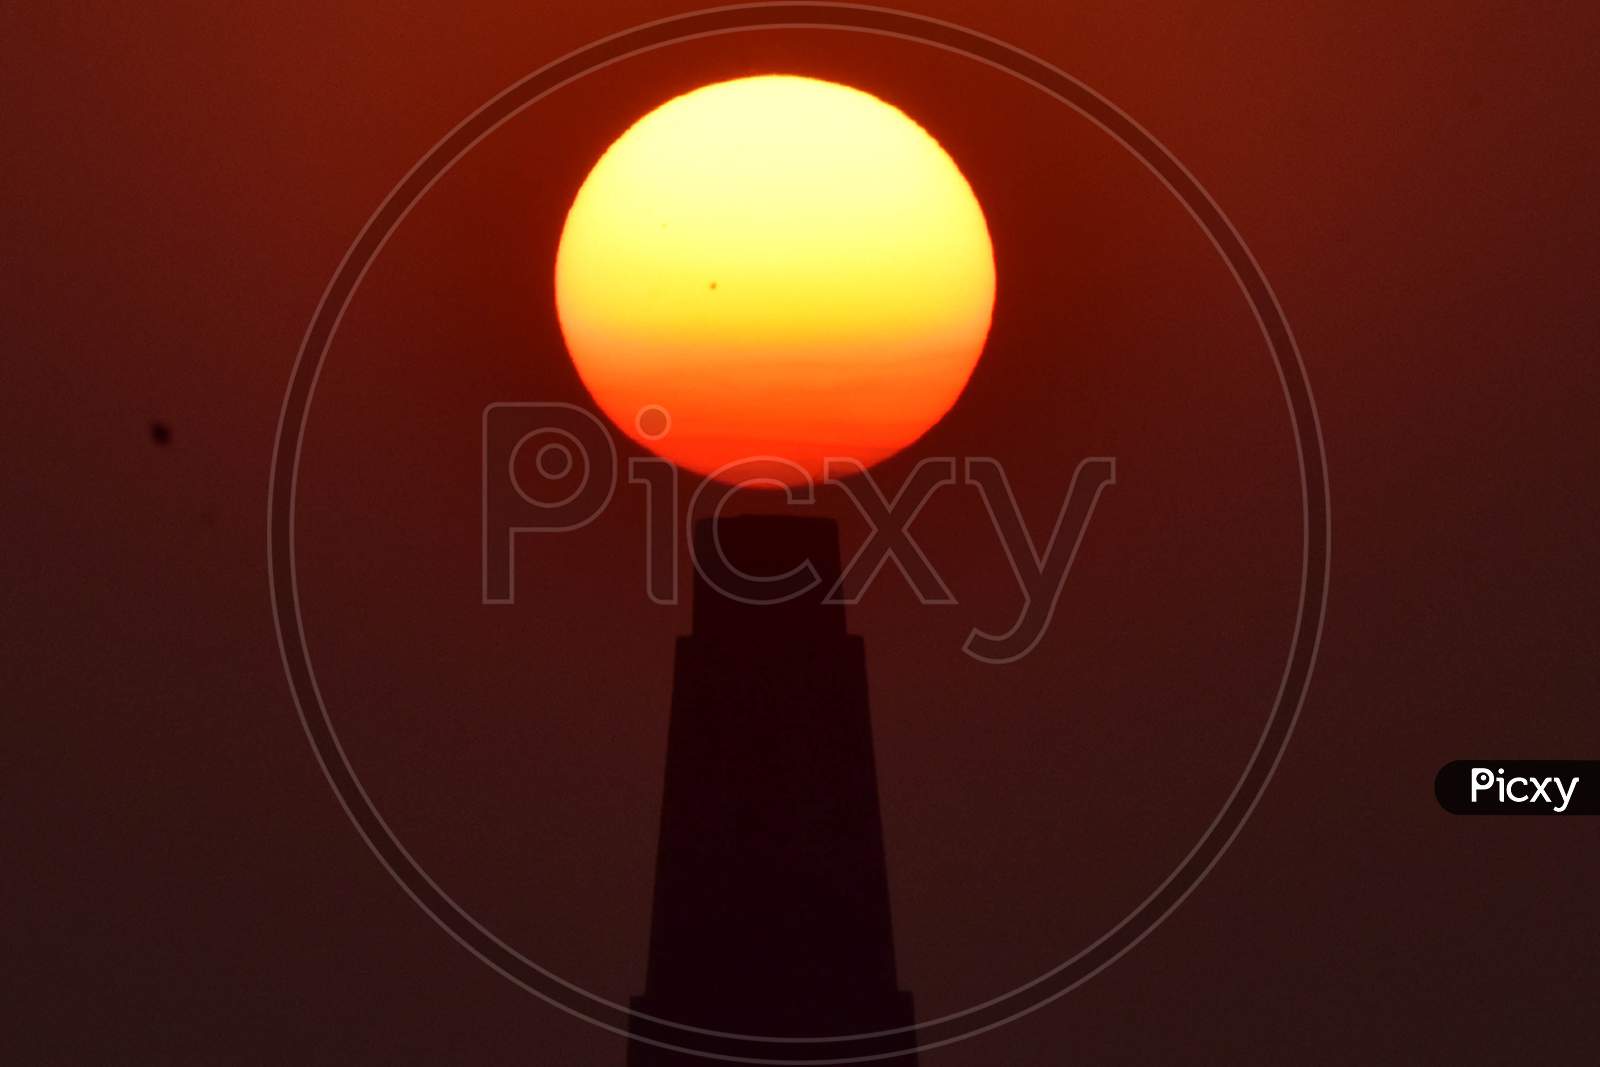 The sun set behind the brick kiln factory  in Assam on Dec 31,2020